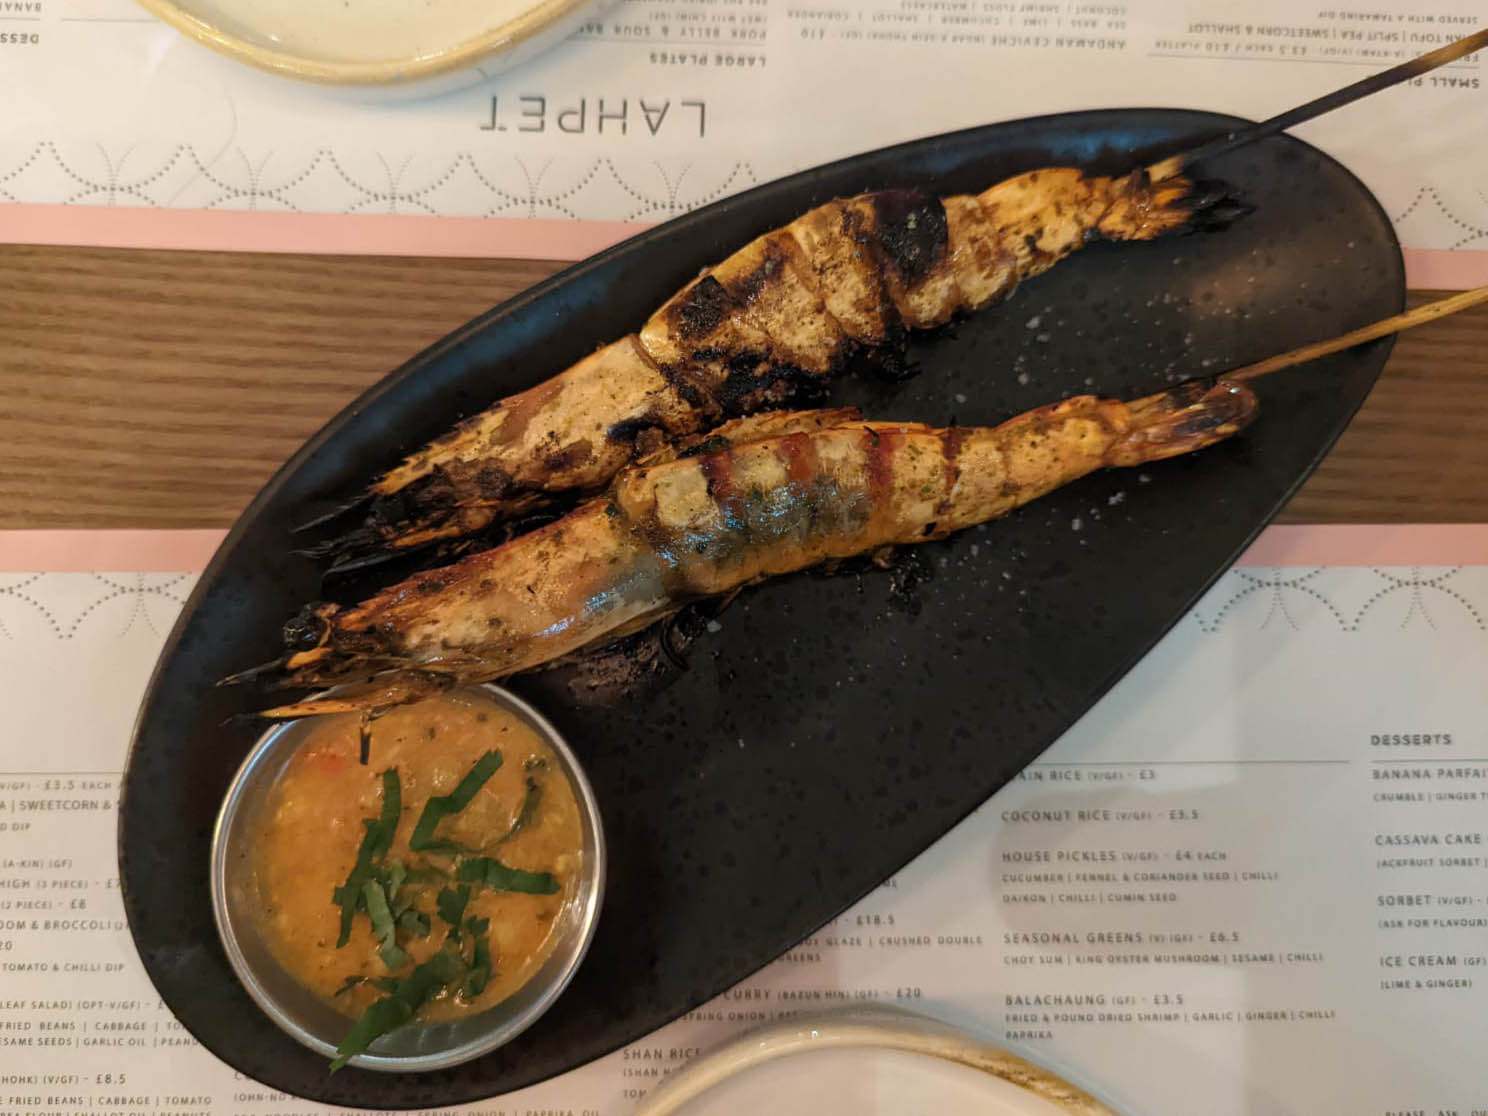 The chargrilled black tiger prawns have taken on a sultry sweet smokiness